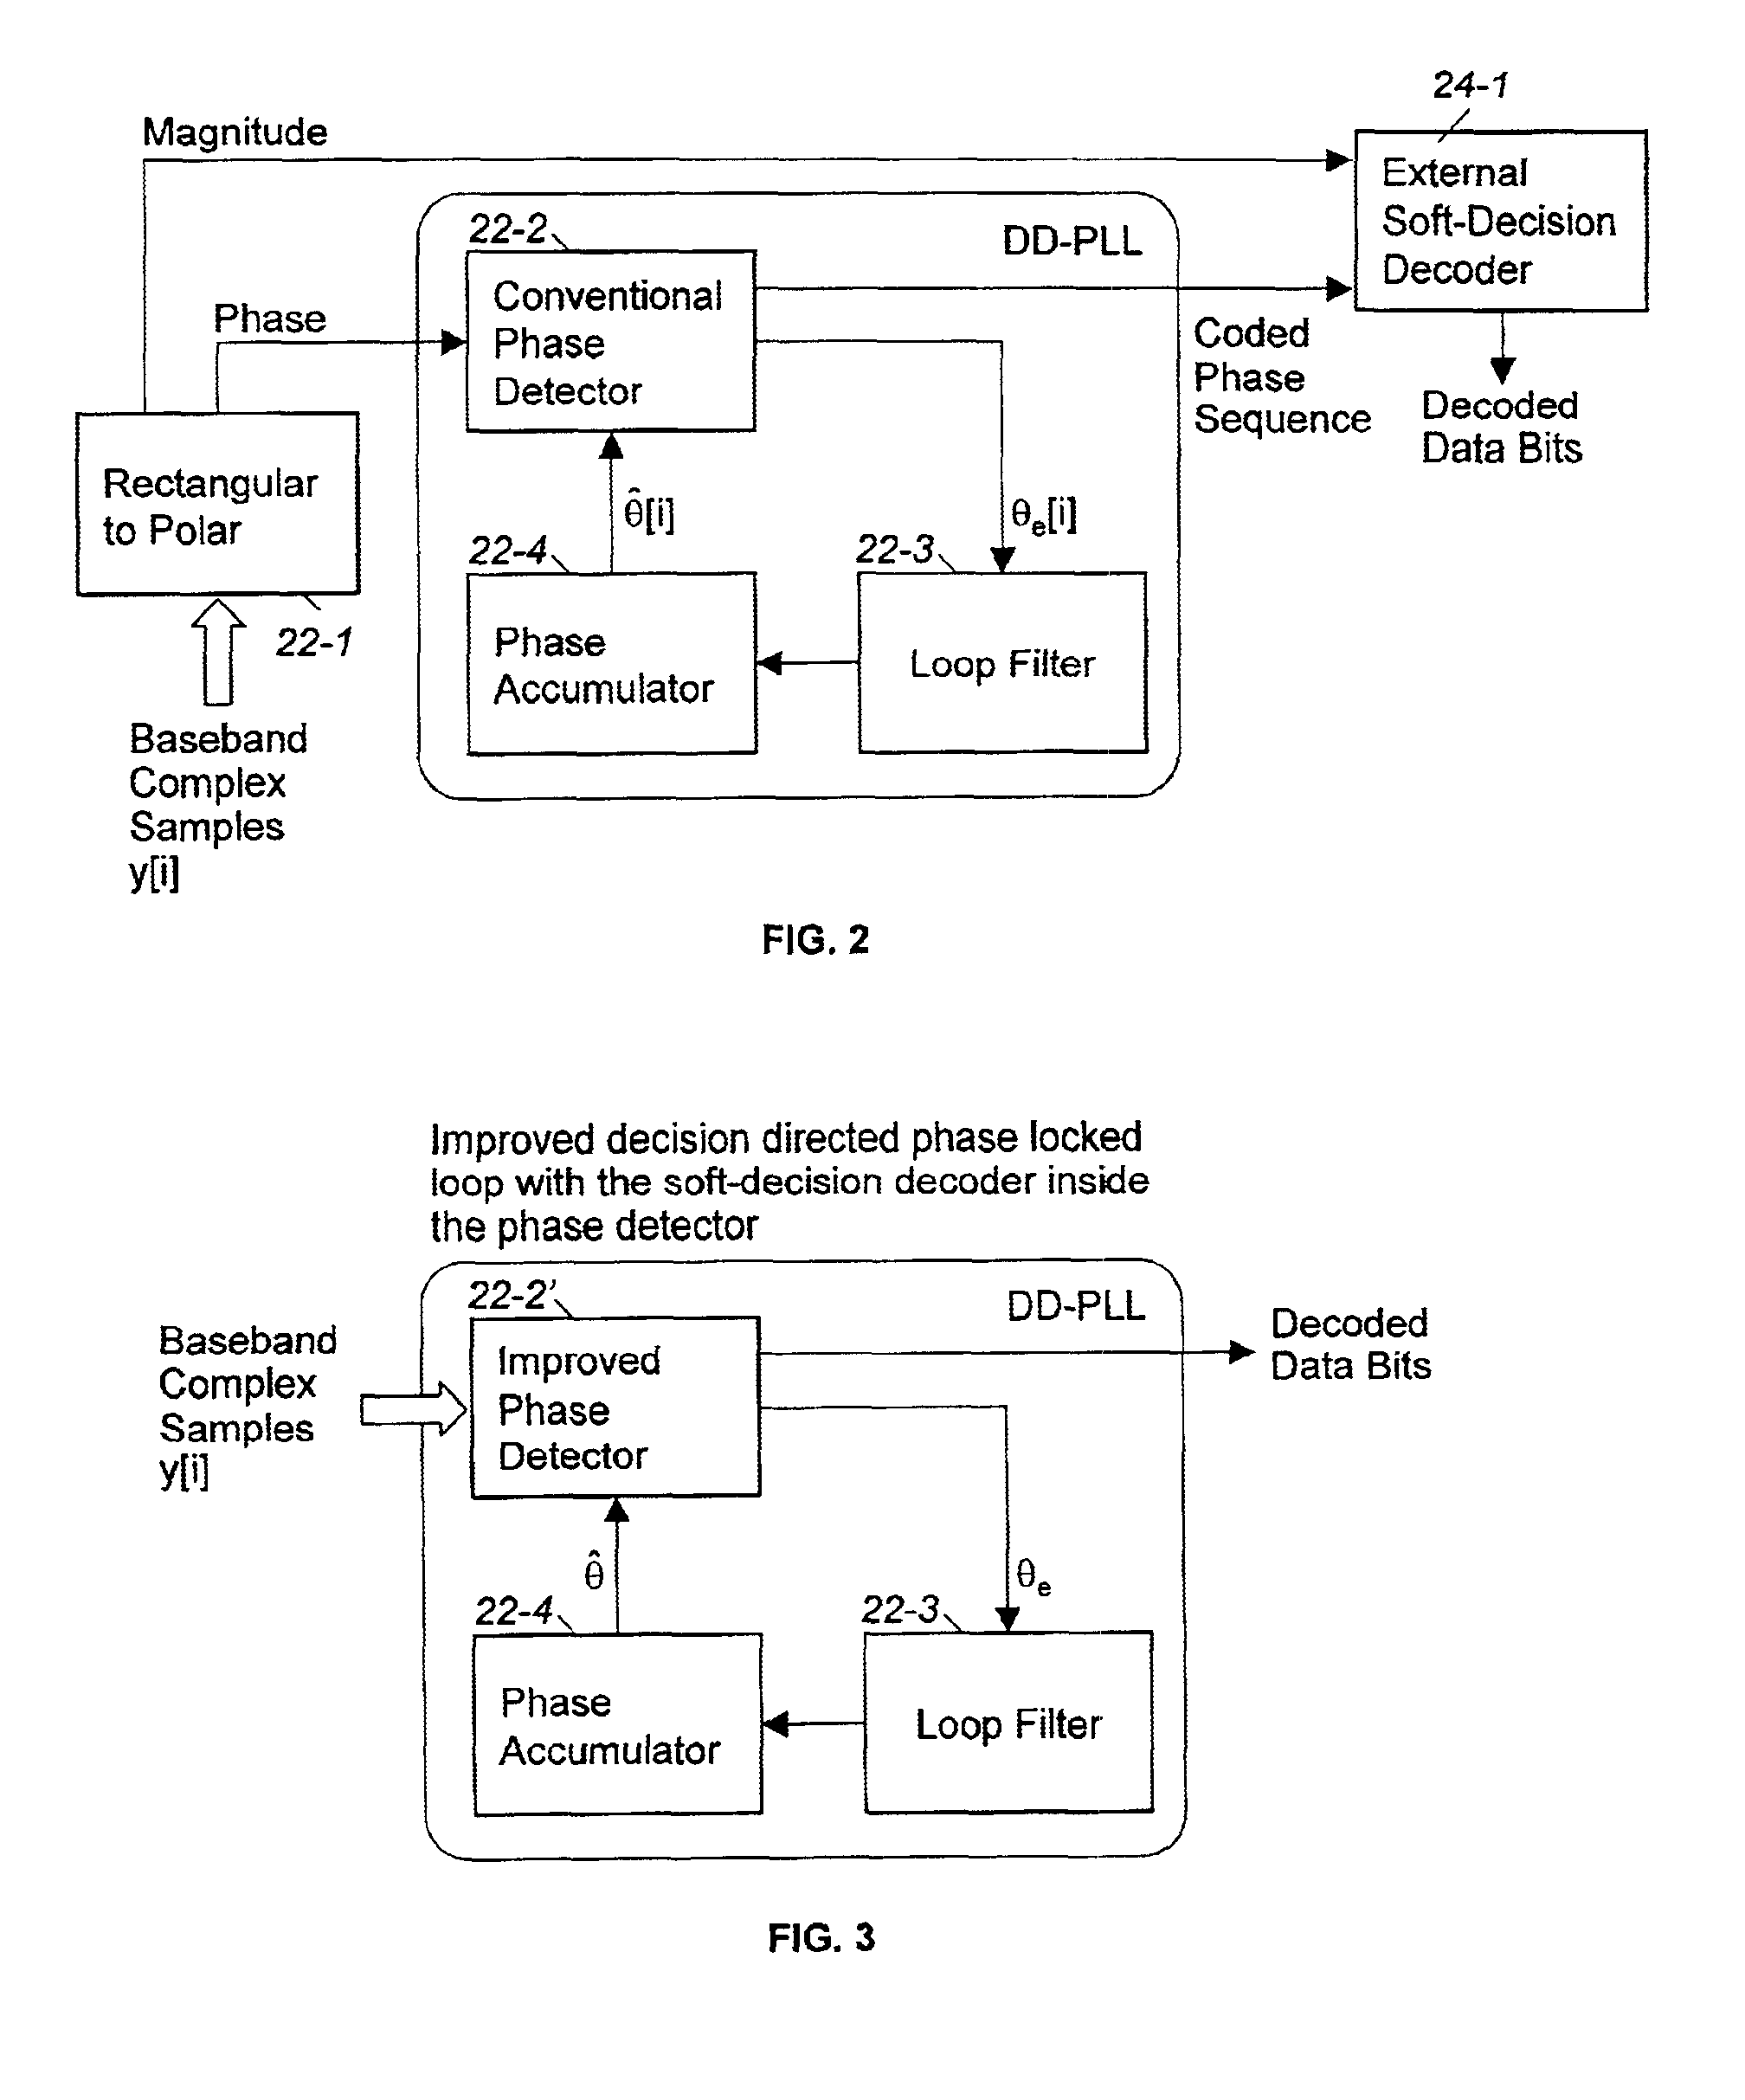 Efficient implementation of a decision directed phase locked loop (DD-PLL) for use with short block code in digital communication systems